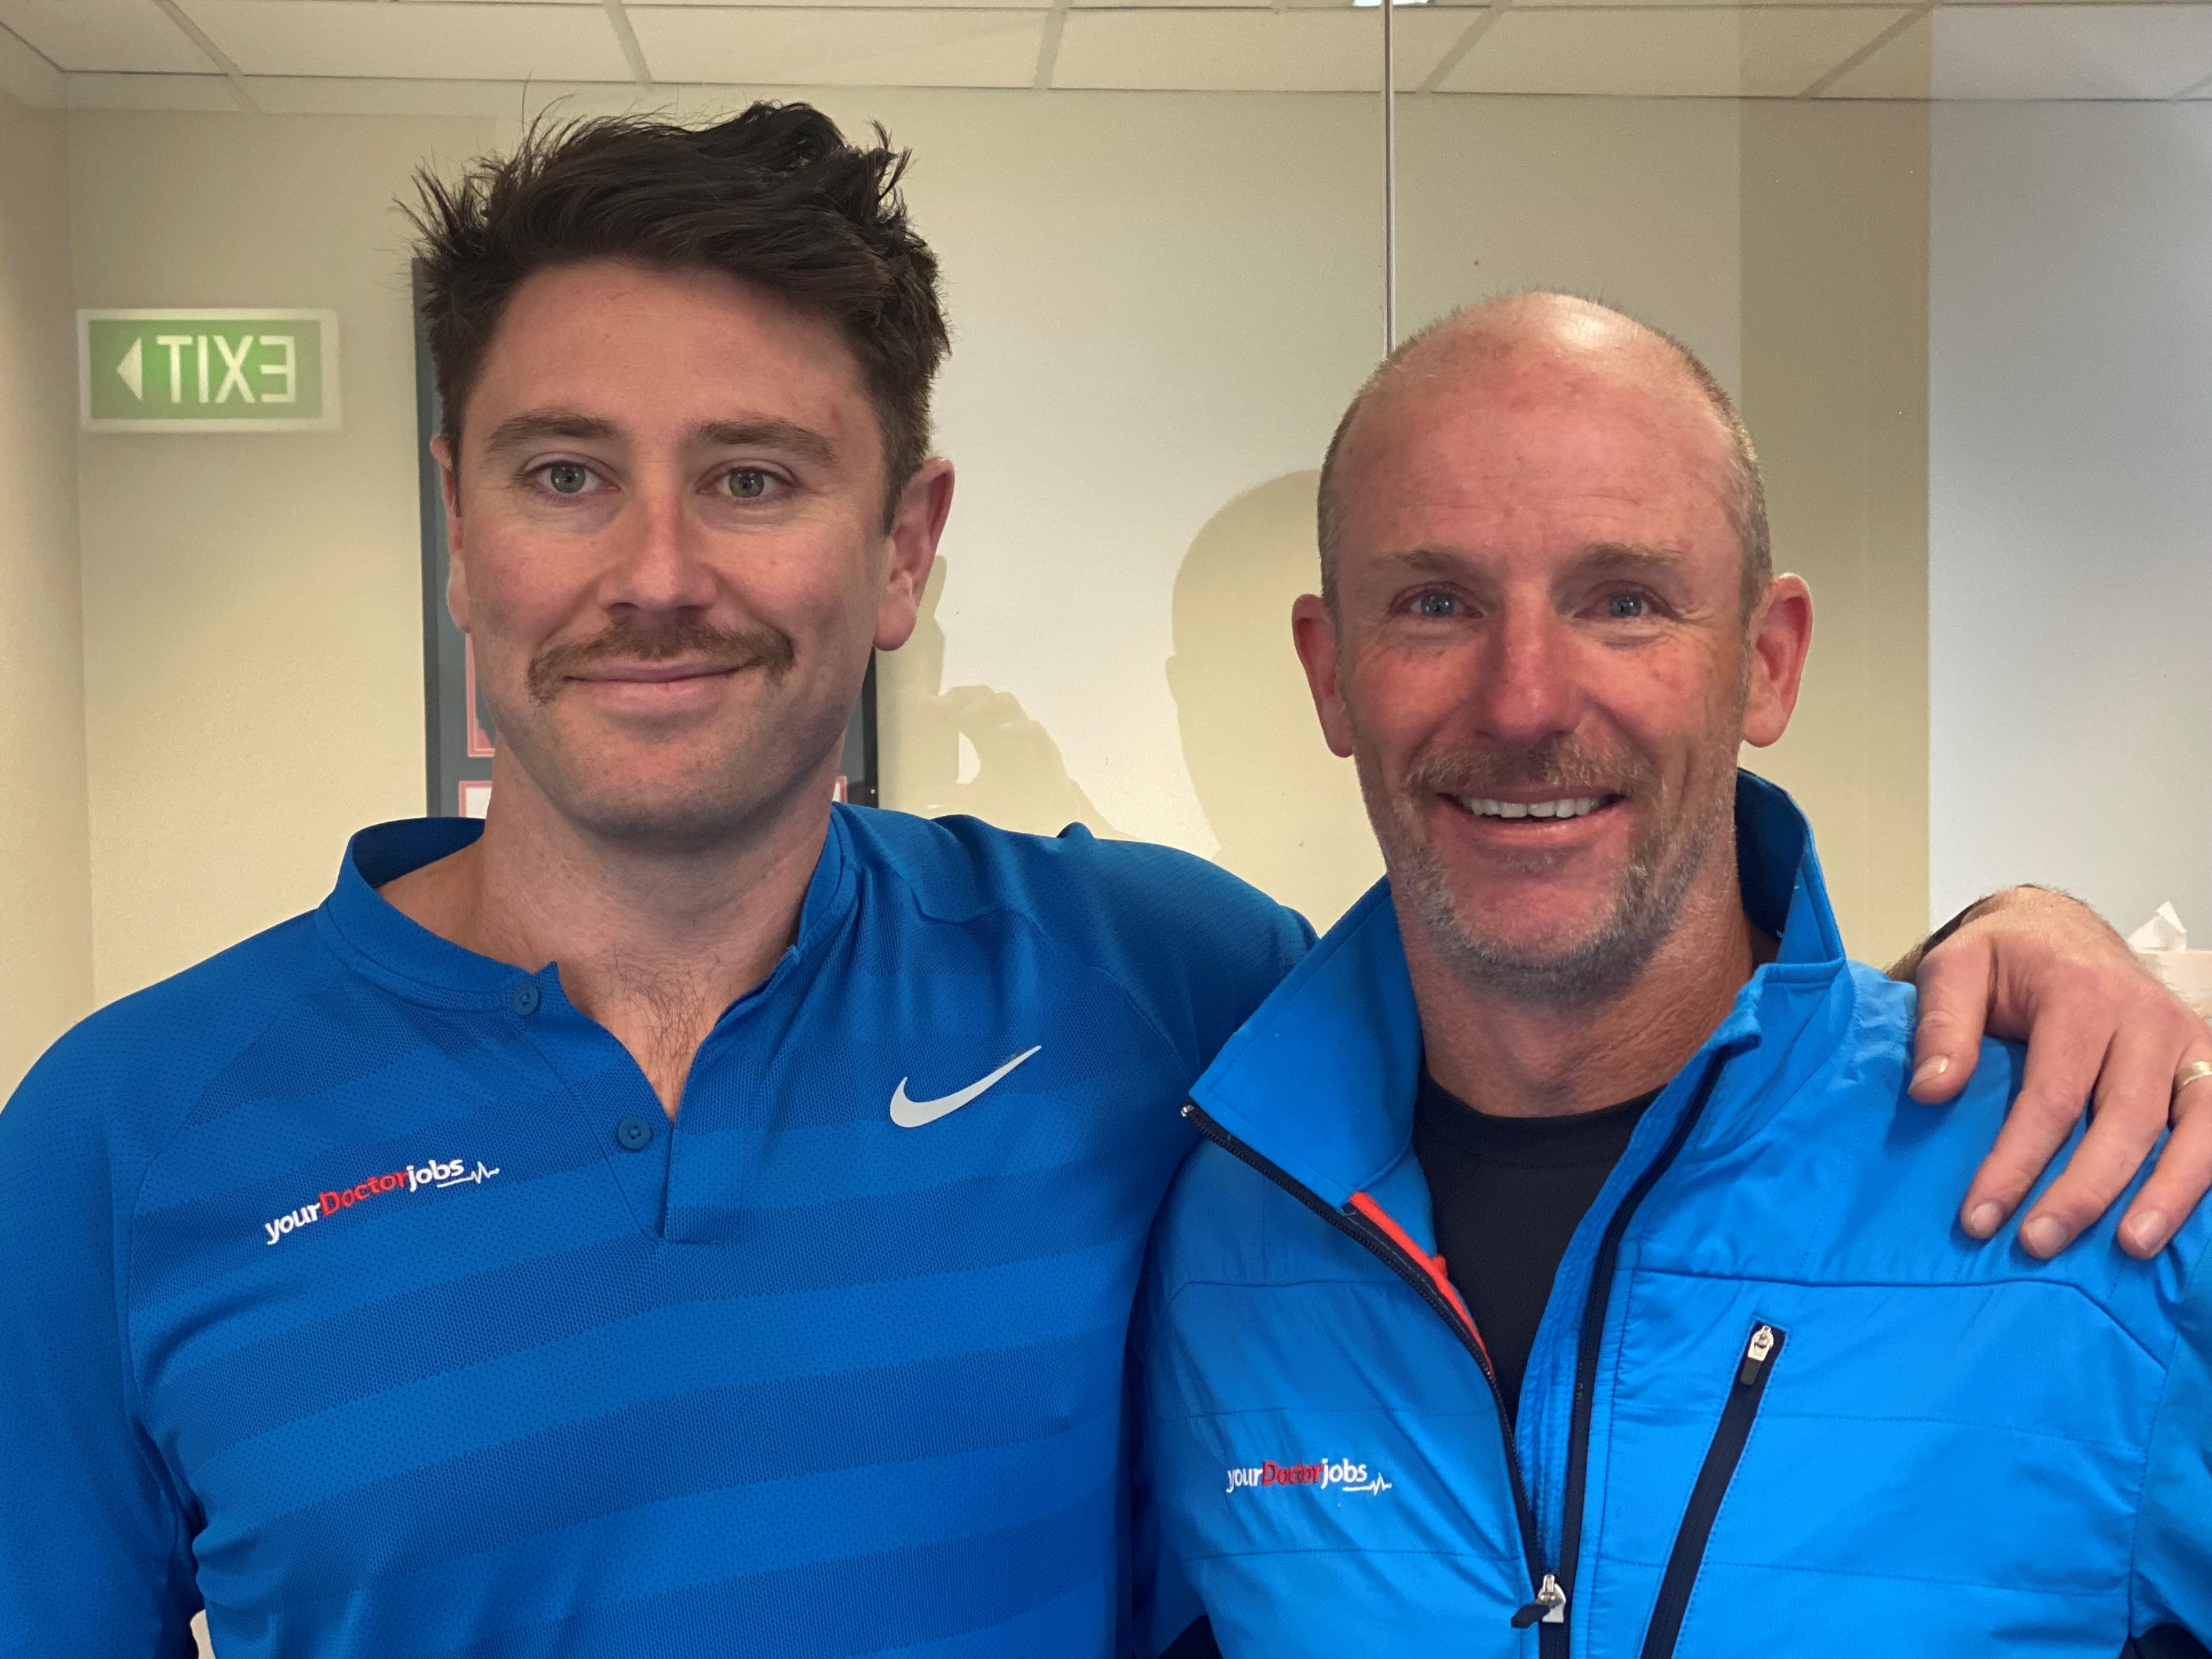 The YDJ boys take on Movember for 2021!